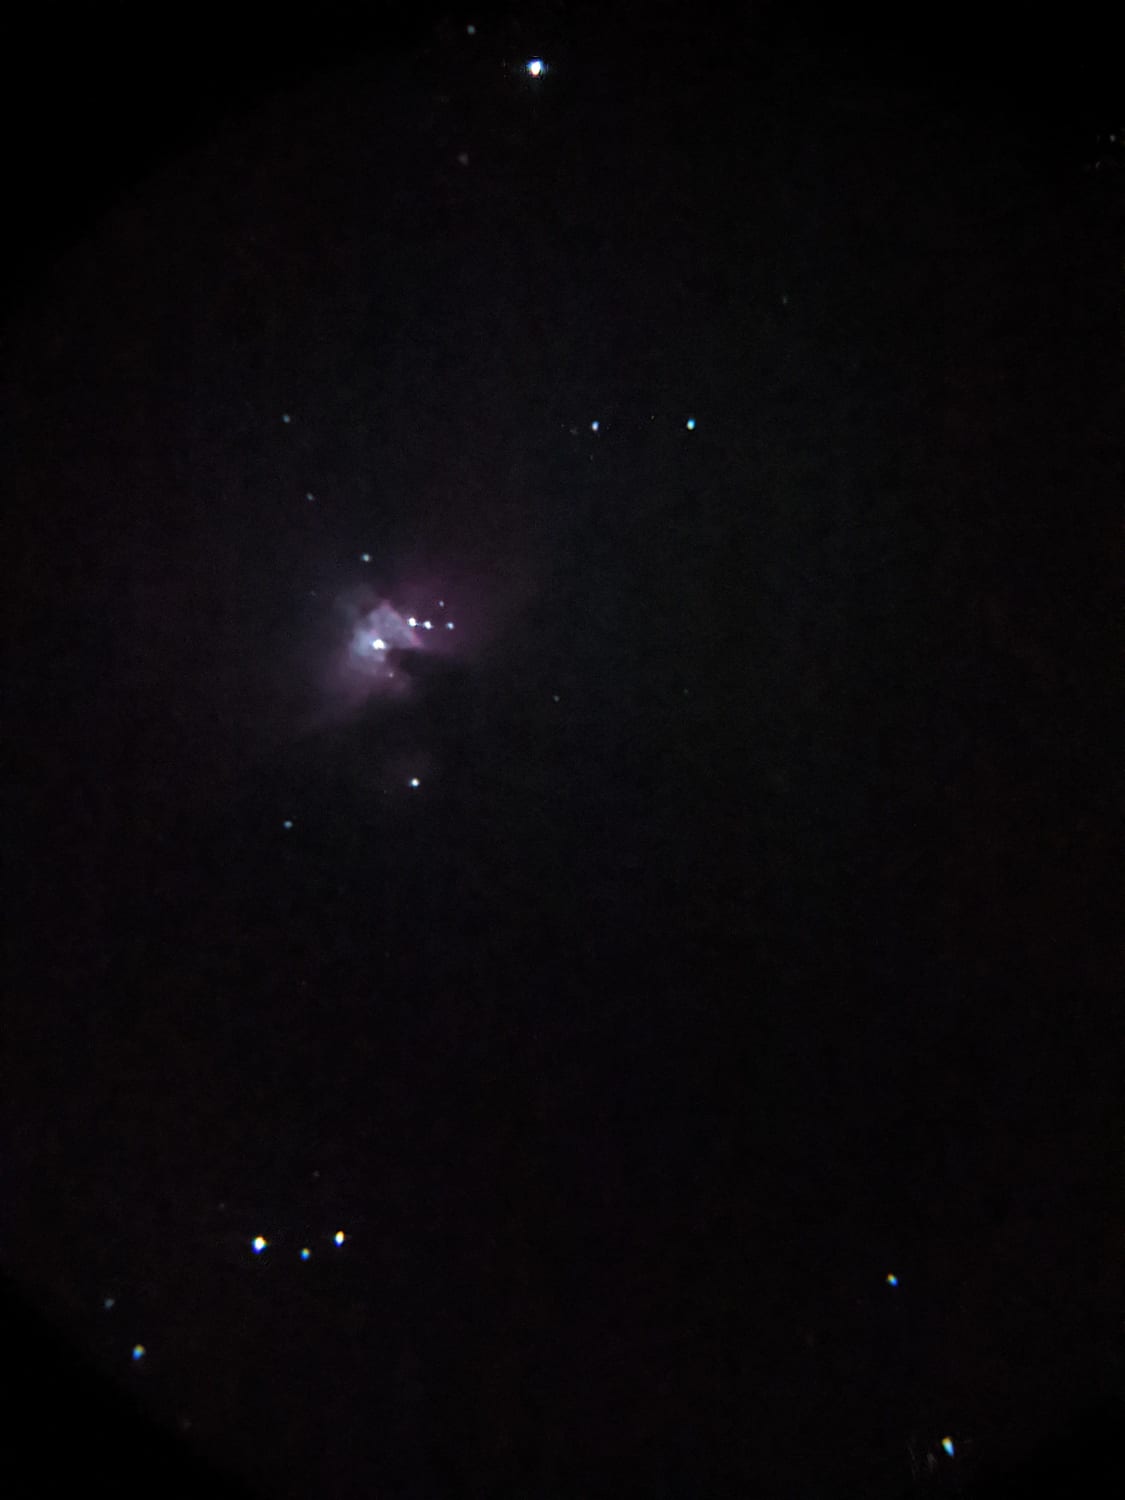 Shitty phone picture of the orion nebula last night through my new scope